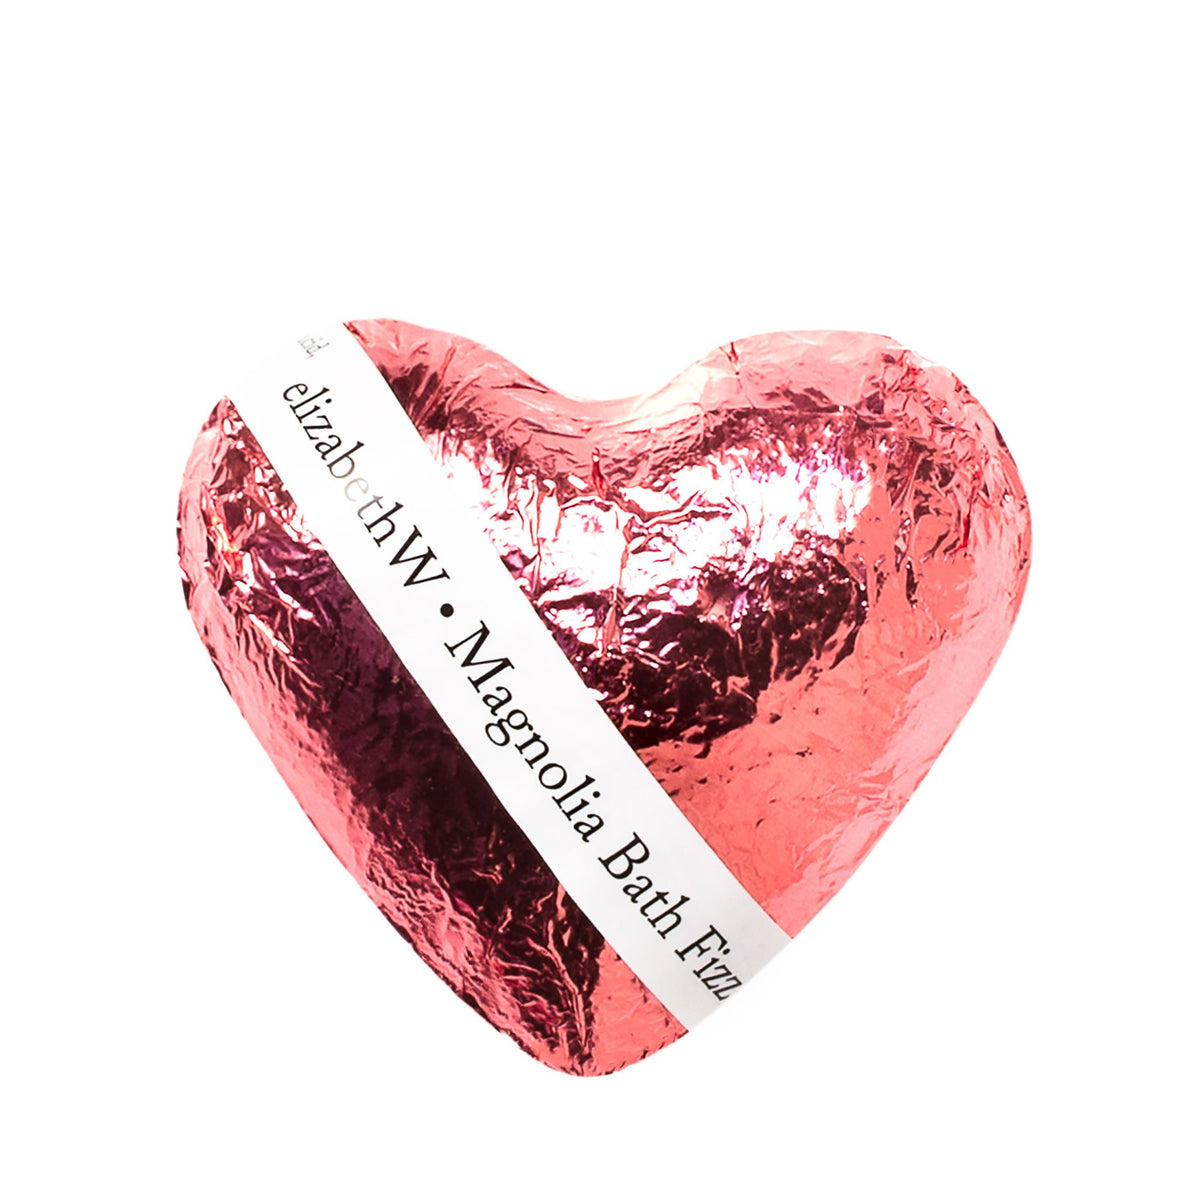 A heart-shaped, pink foil-wrapped bath bomb with a label that reads "elizabeth W Fizz Heart - Magnolia." The packaging has a crinkly texture, reflecting studio lighting.